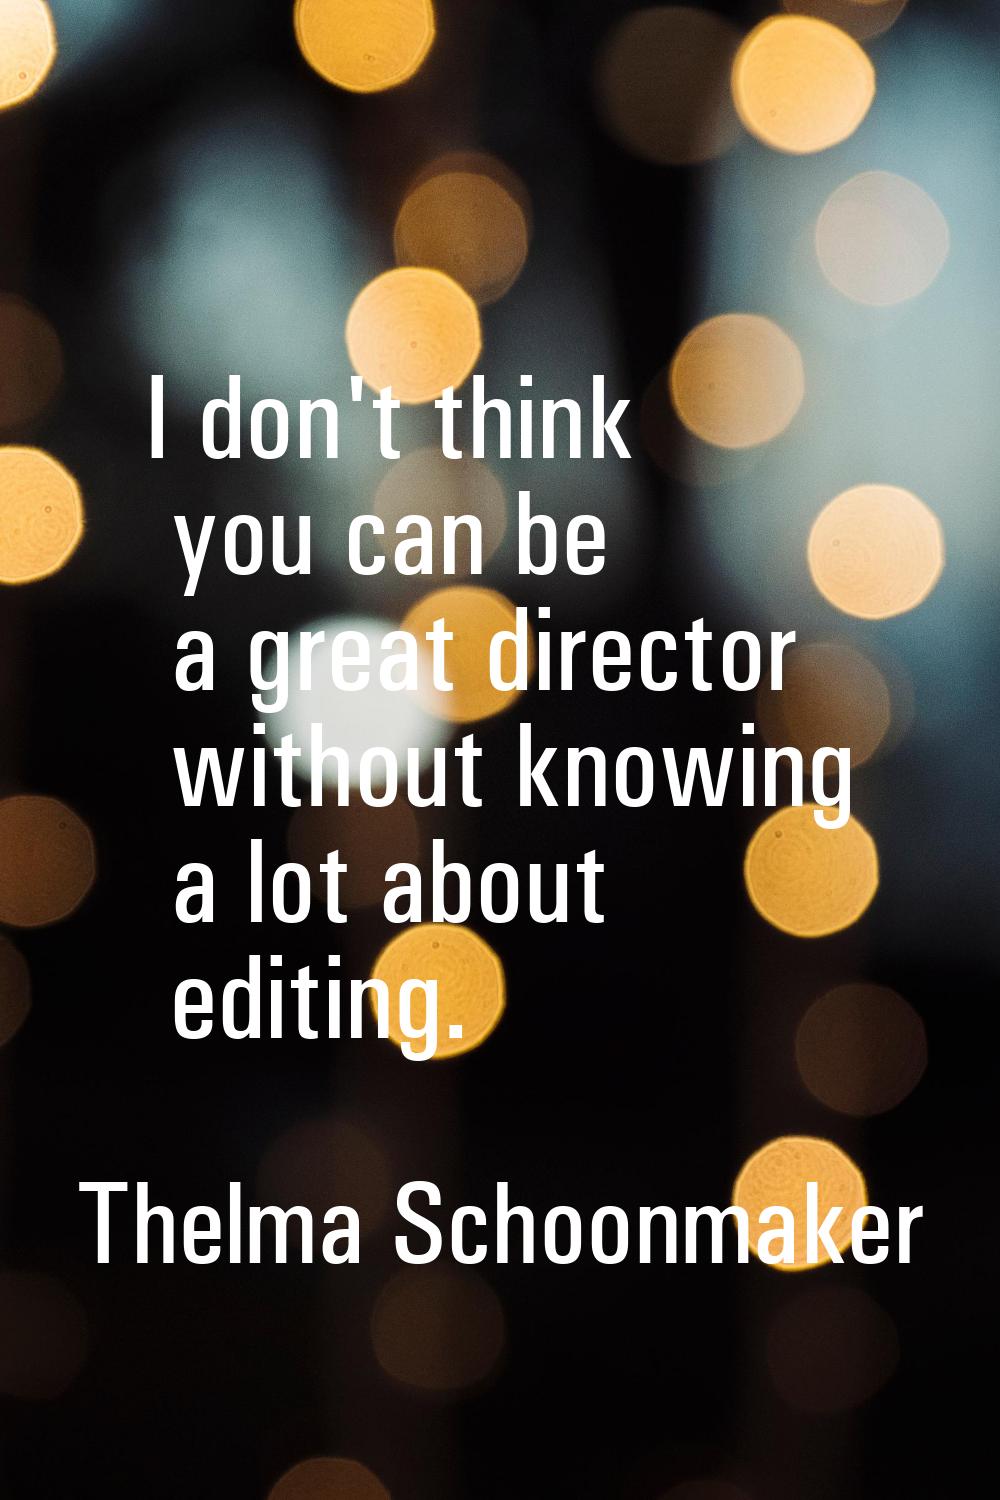 I don't think you can be a great director without knowing a lot about editing.